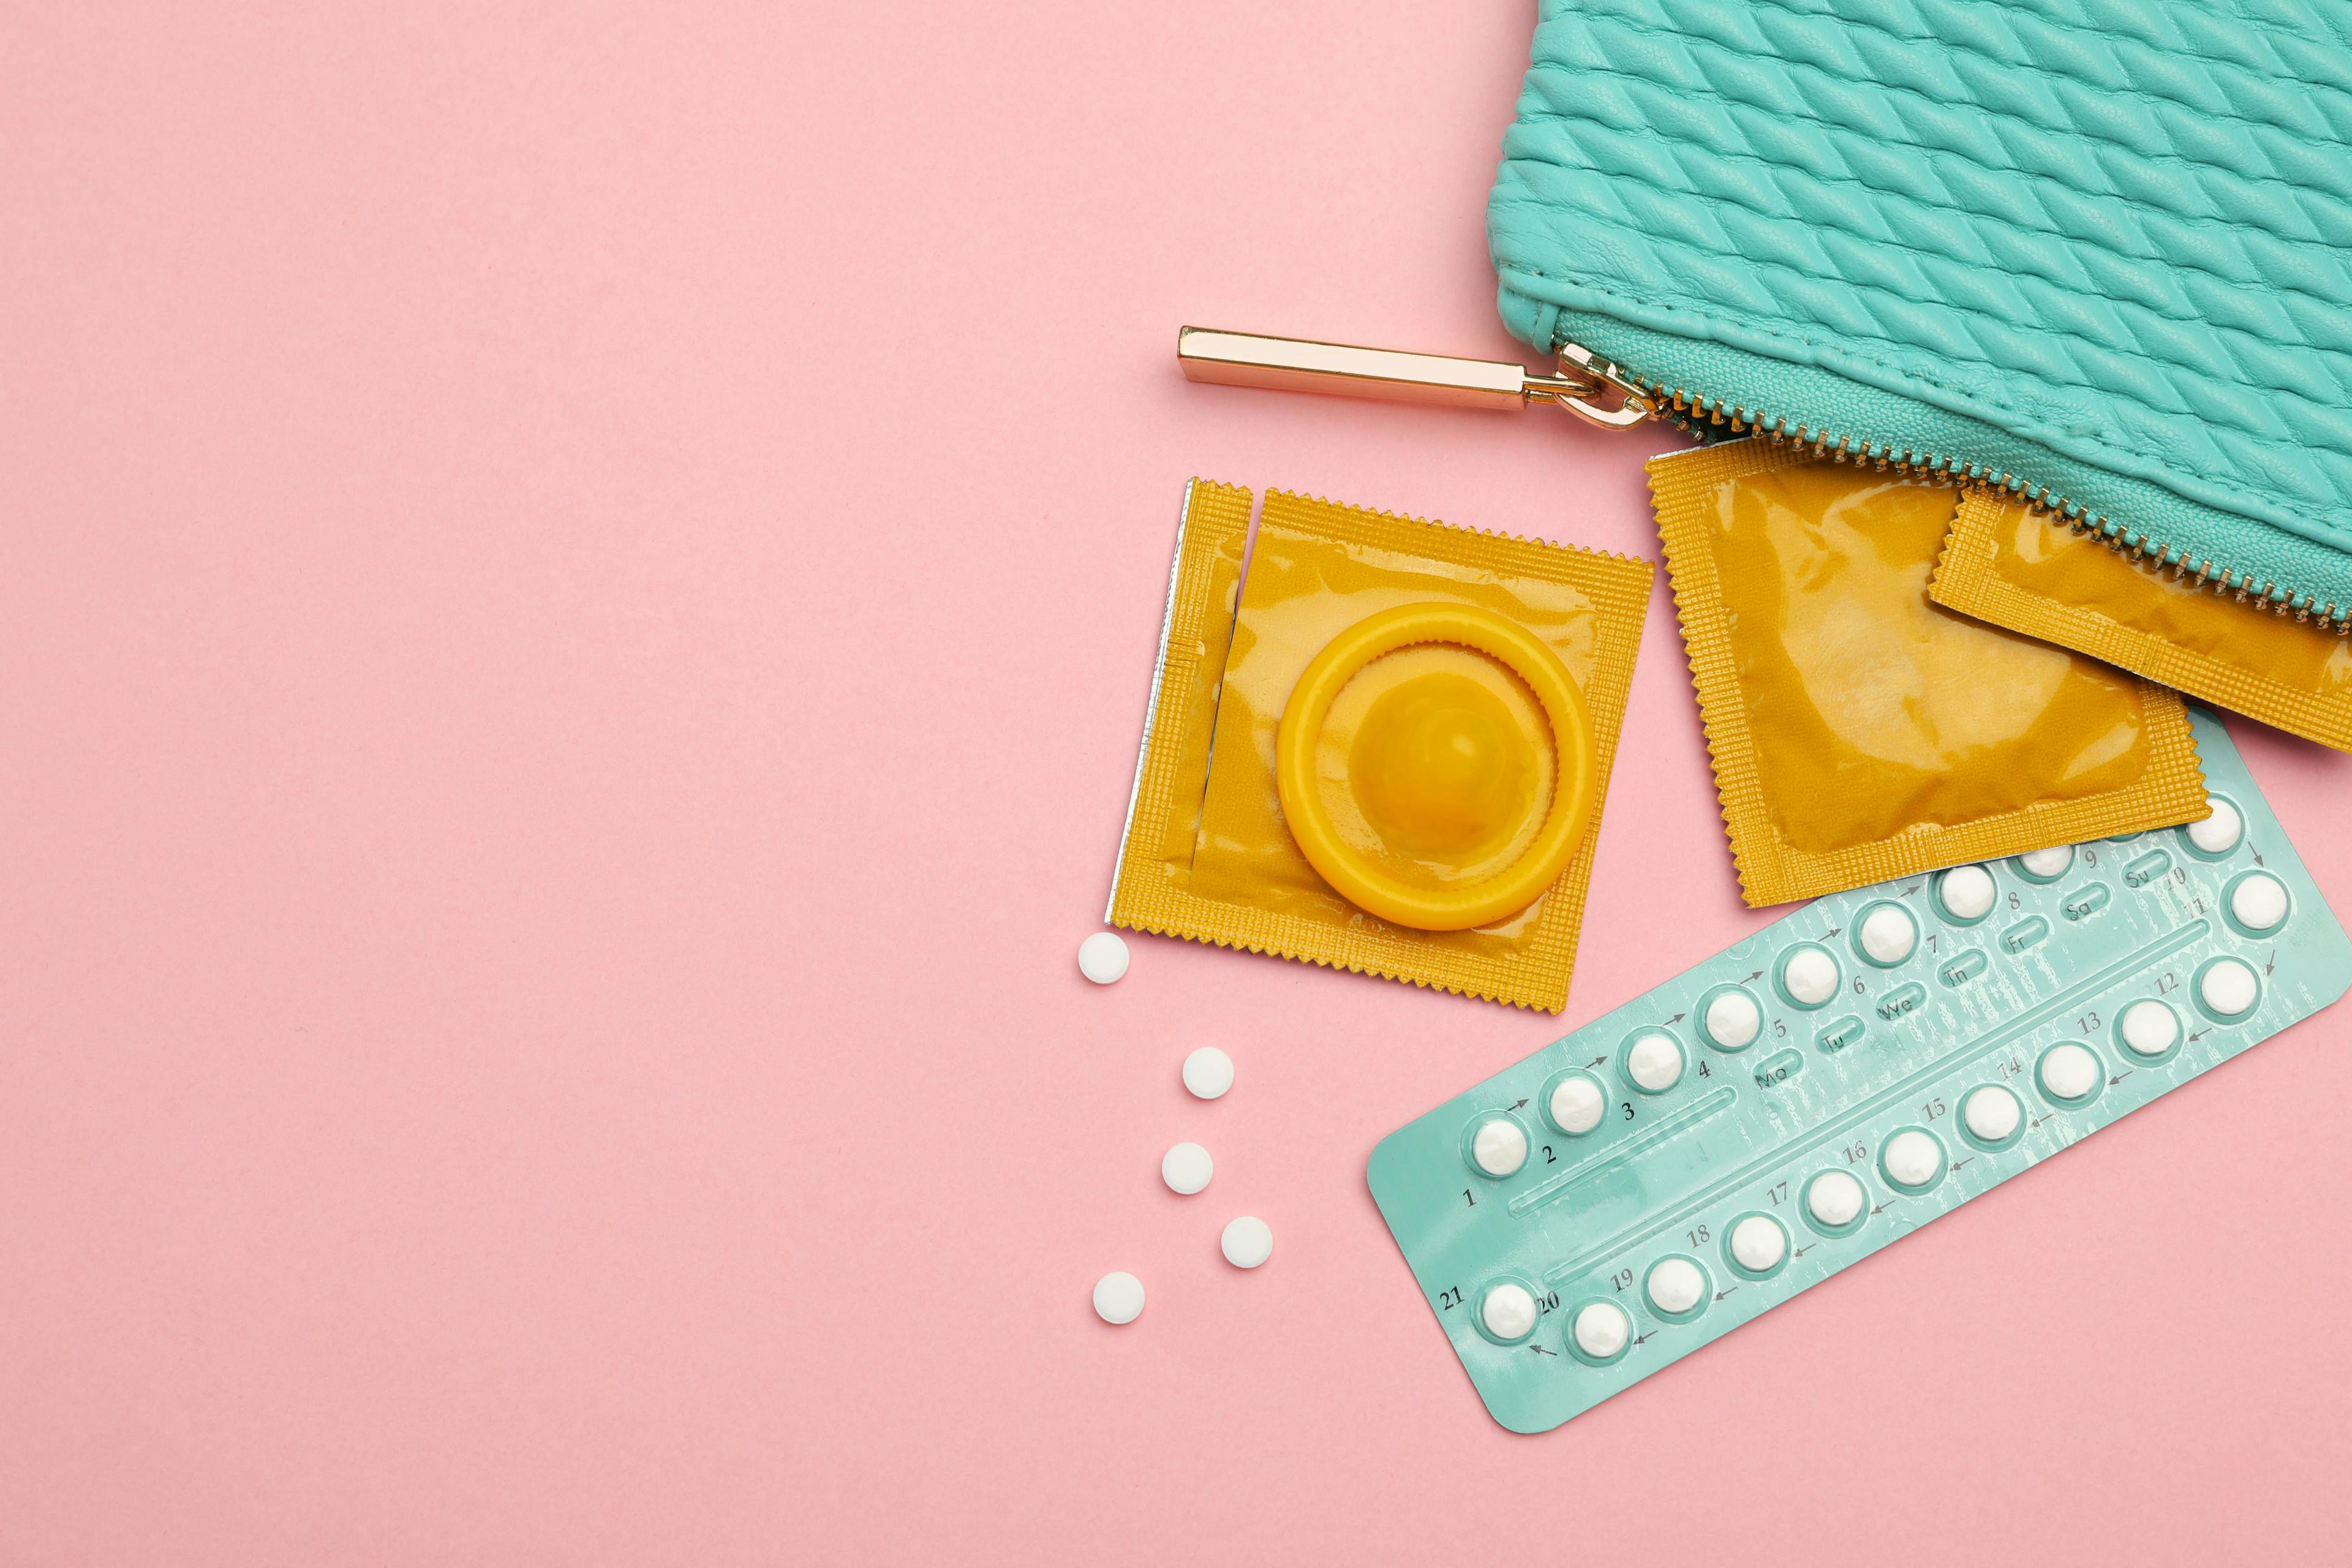 Contraception for adolescents post-Dobbs | Image Credit: © New Africa - © New Africa - stock.adobe.com.